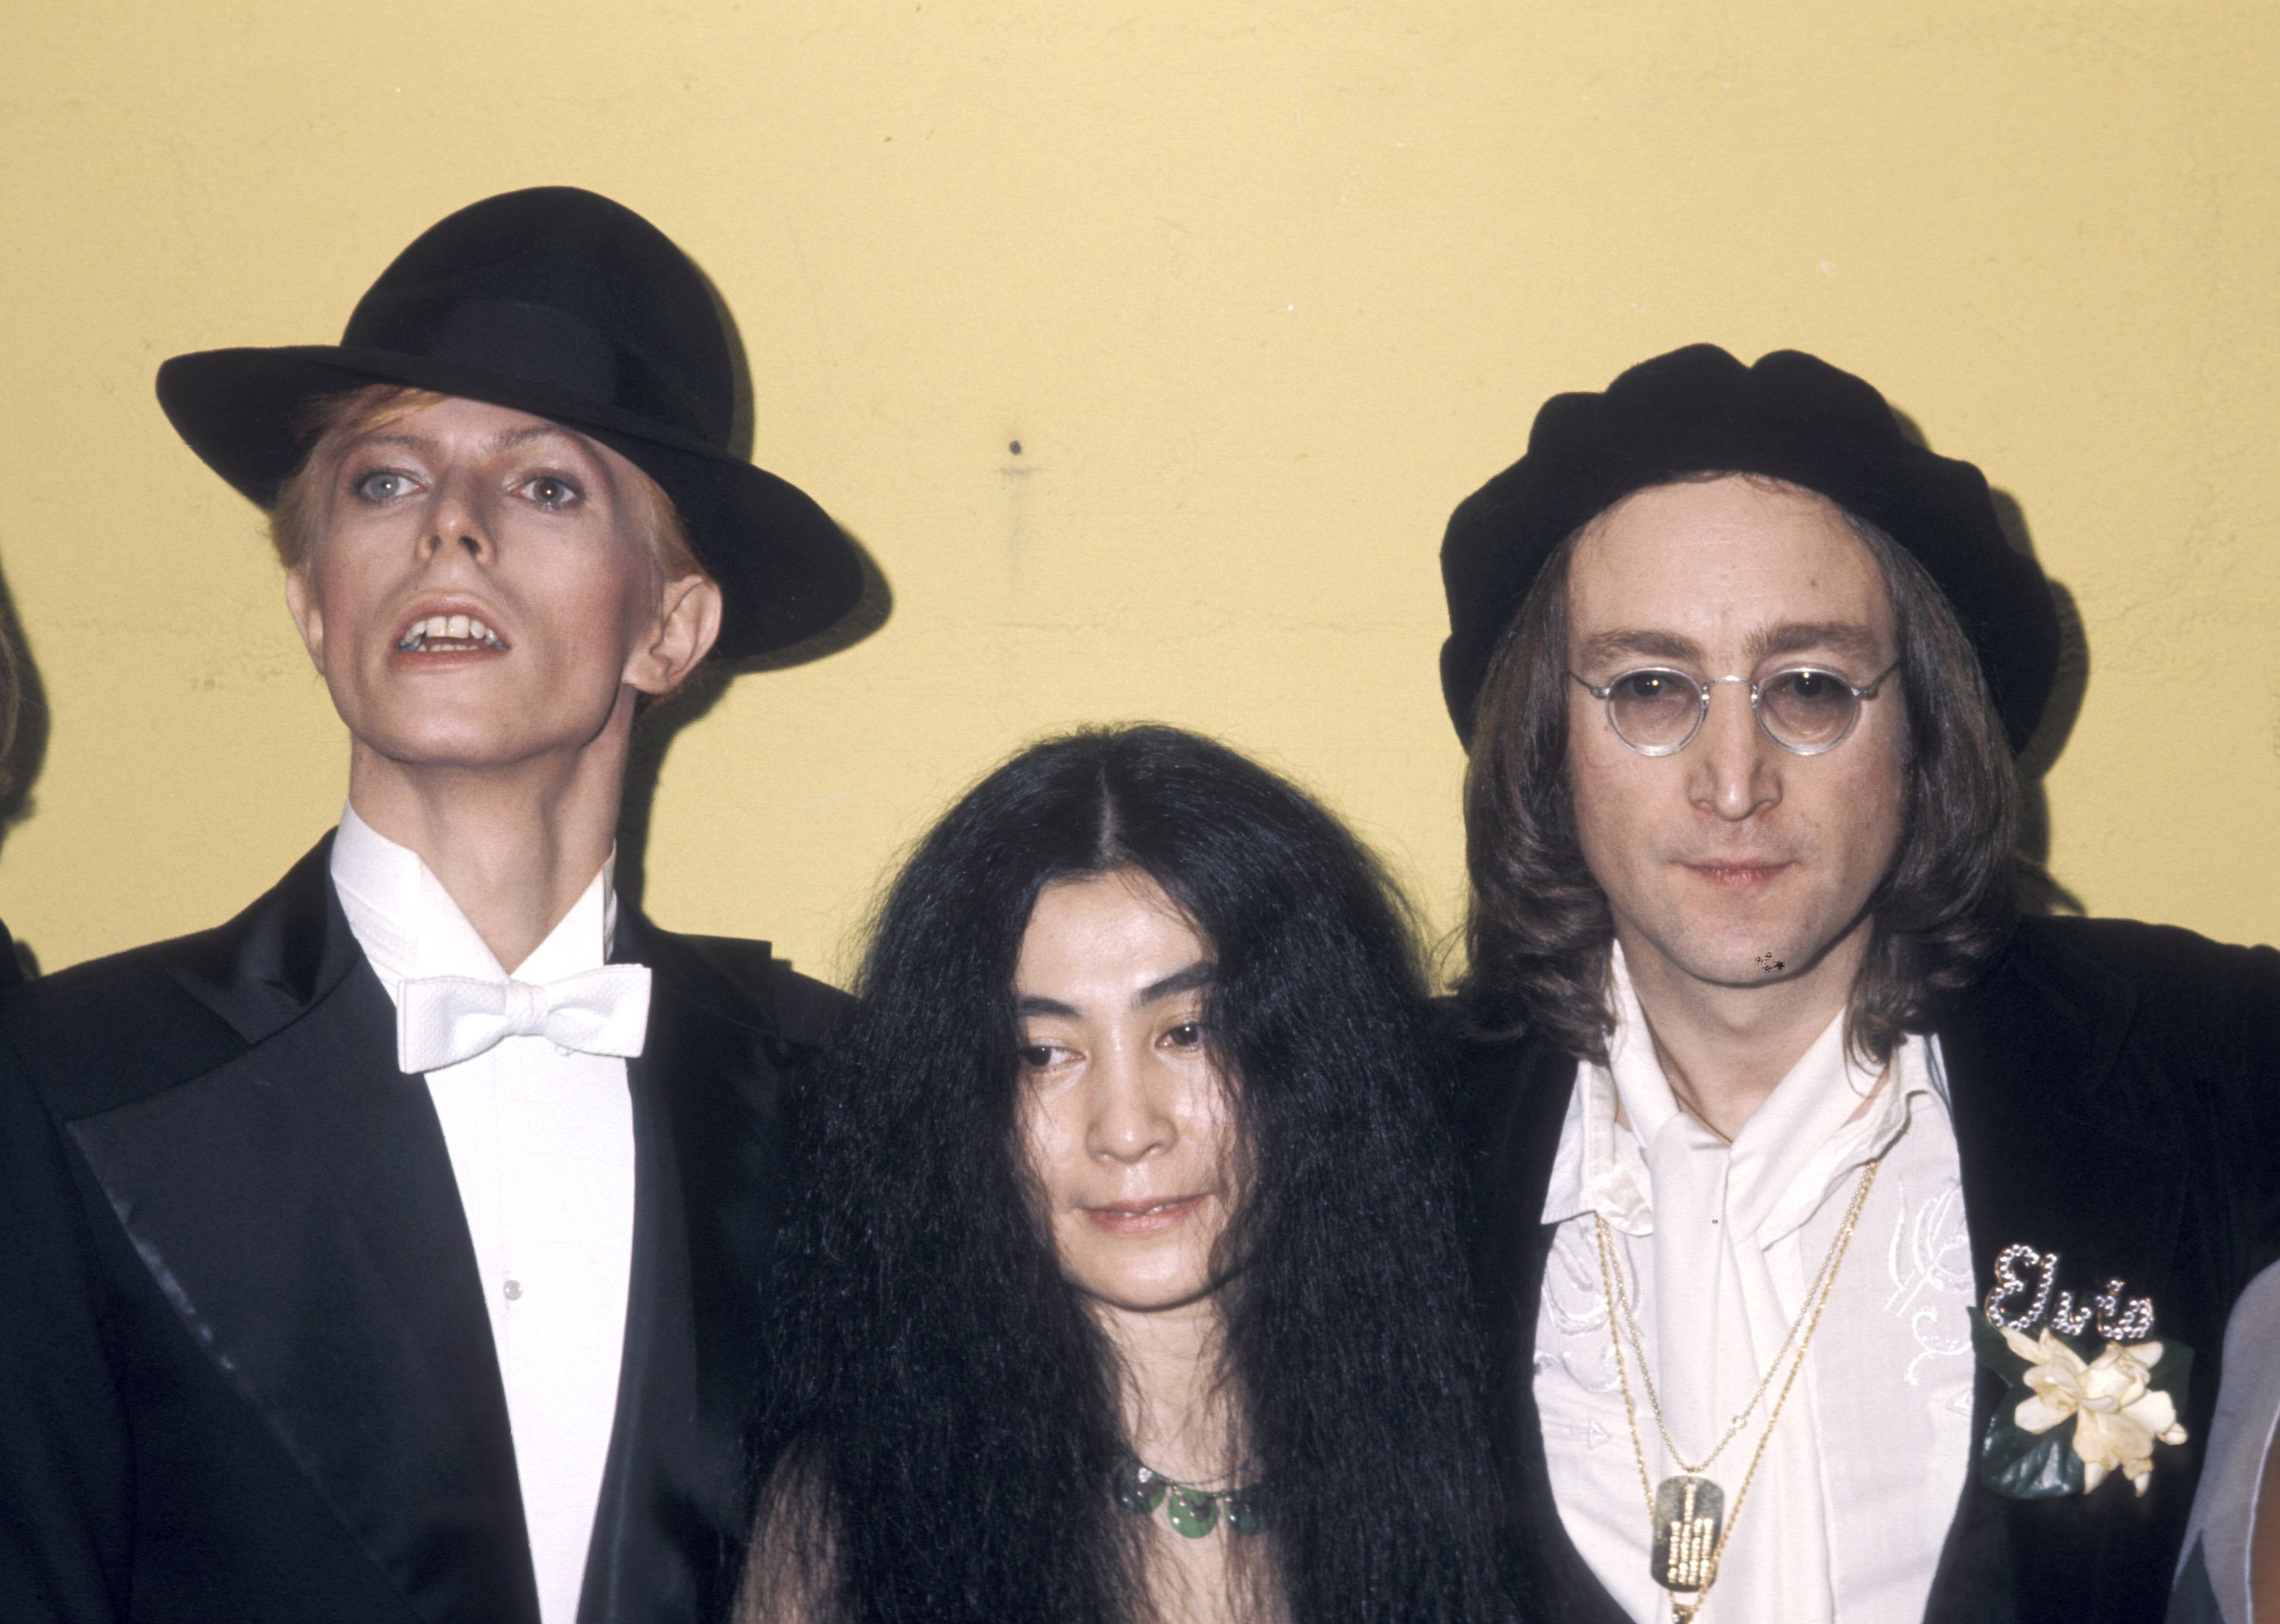 David Bowie, Yoko Ono, and John Lennon in front of a wall